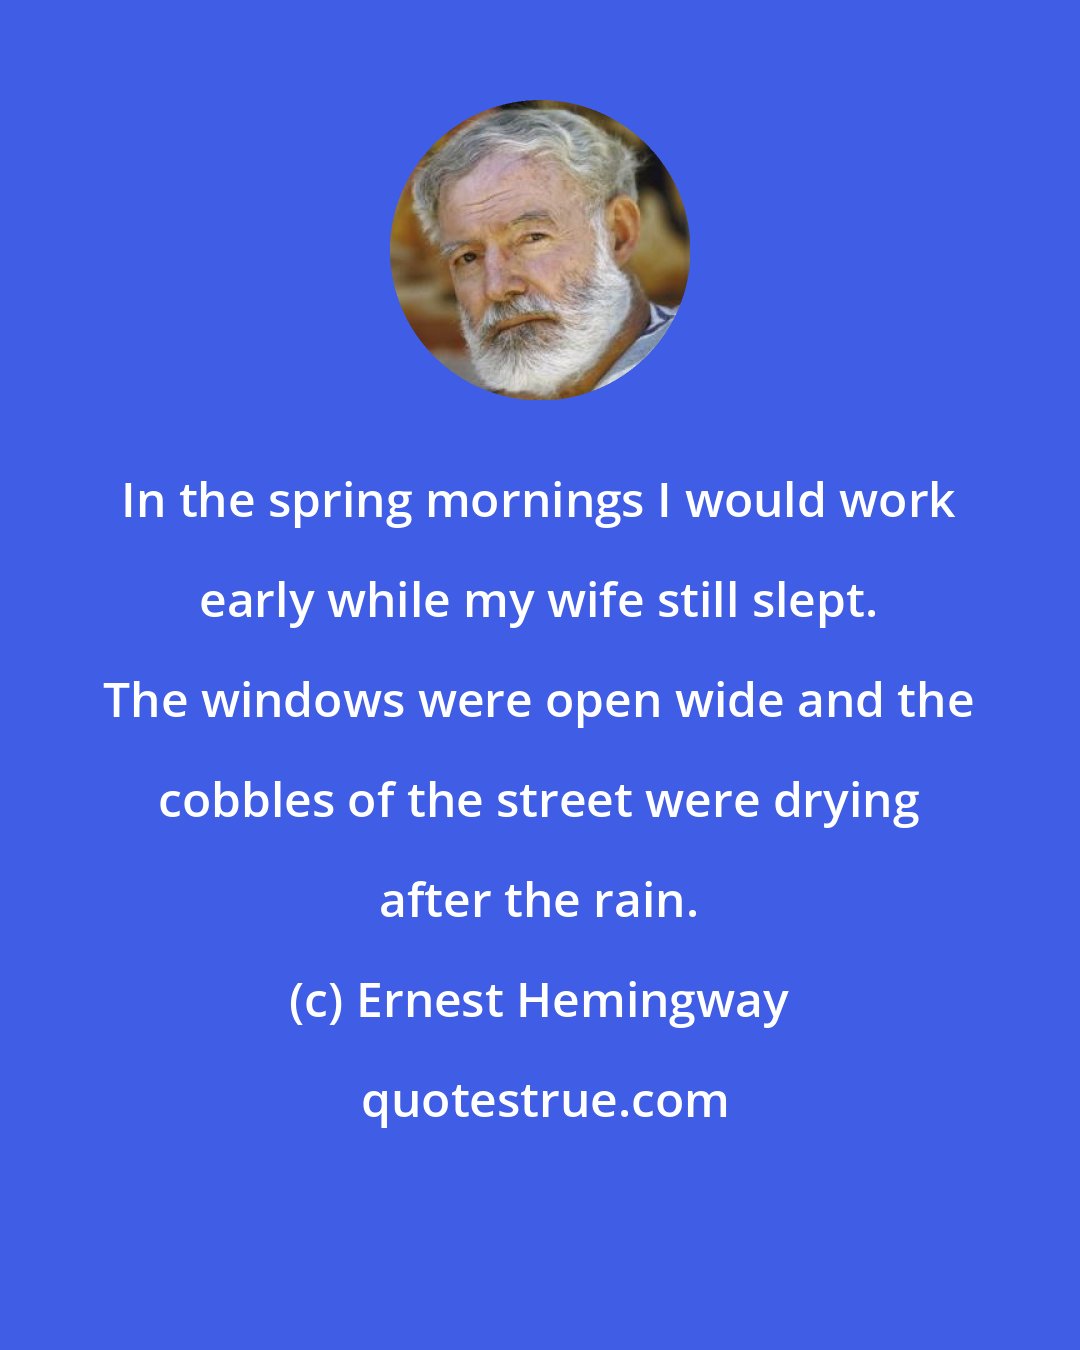 Ernest Hemingway: In the spring mornings I would work early while my wife still slept. The windows were open wide and the cobbles of the street were drying after the rain.